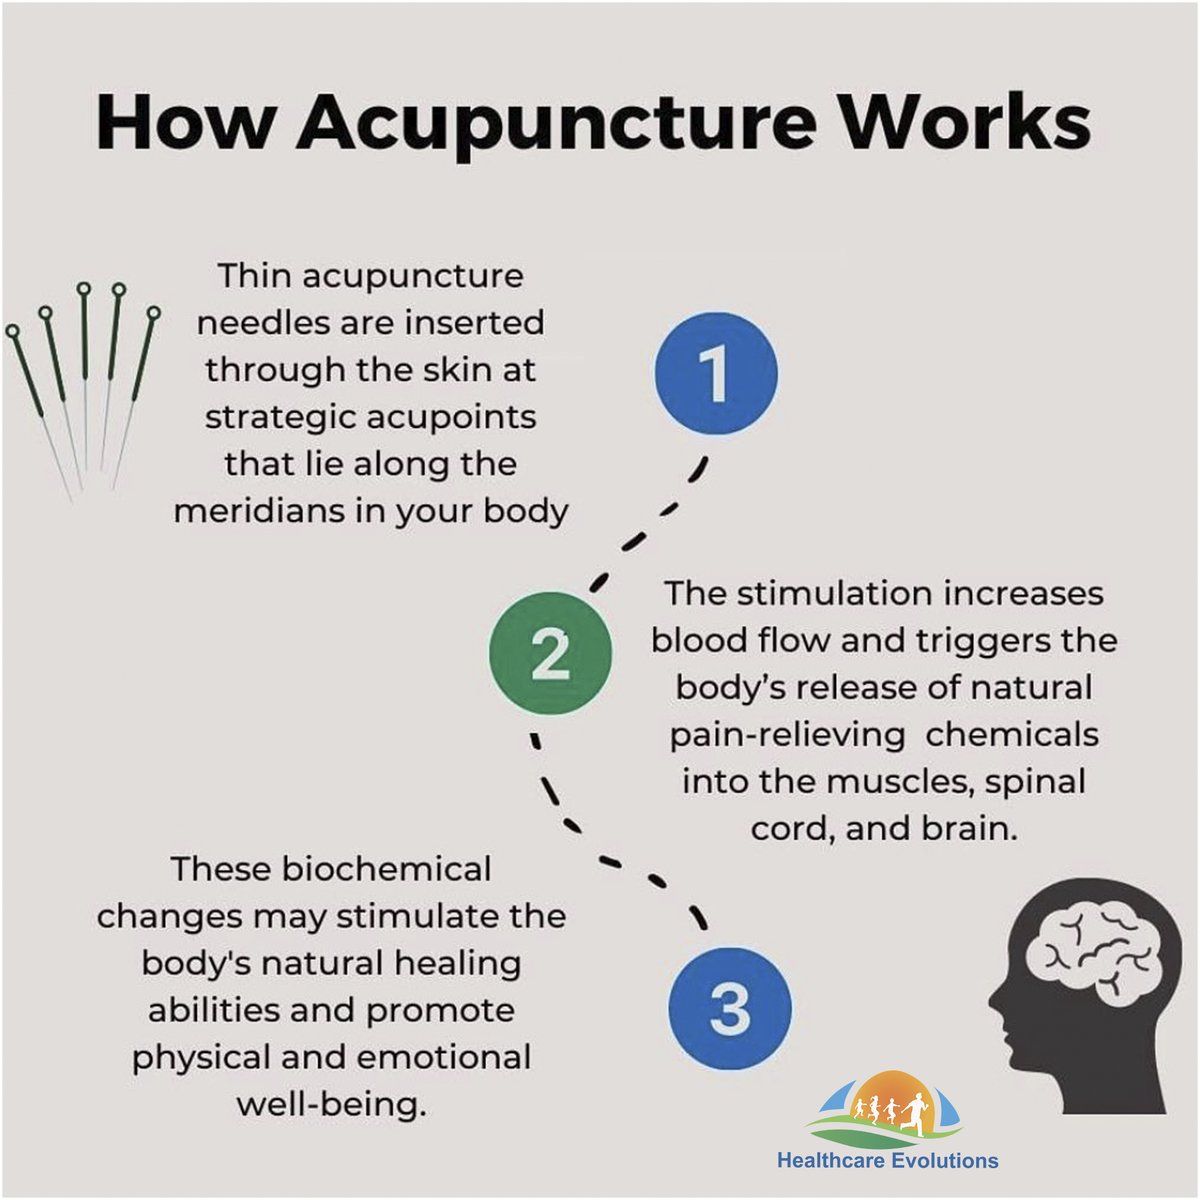 By The Way What Is Acupuncture?

#acupuncture #medicalacupuncture #health #healthylifestyle #healthcare #healthyliving #tips #care #australia #newcastle